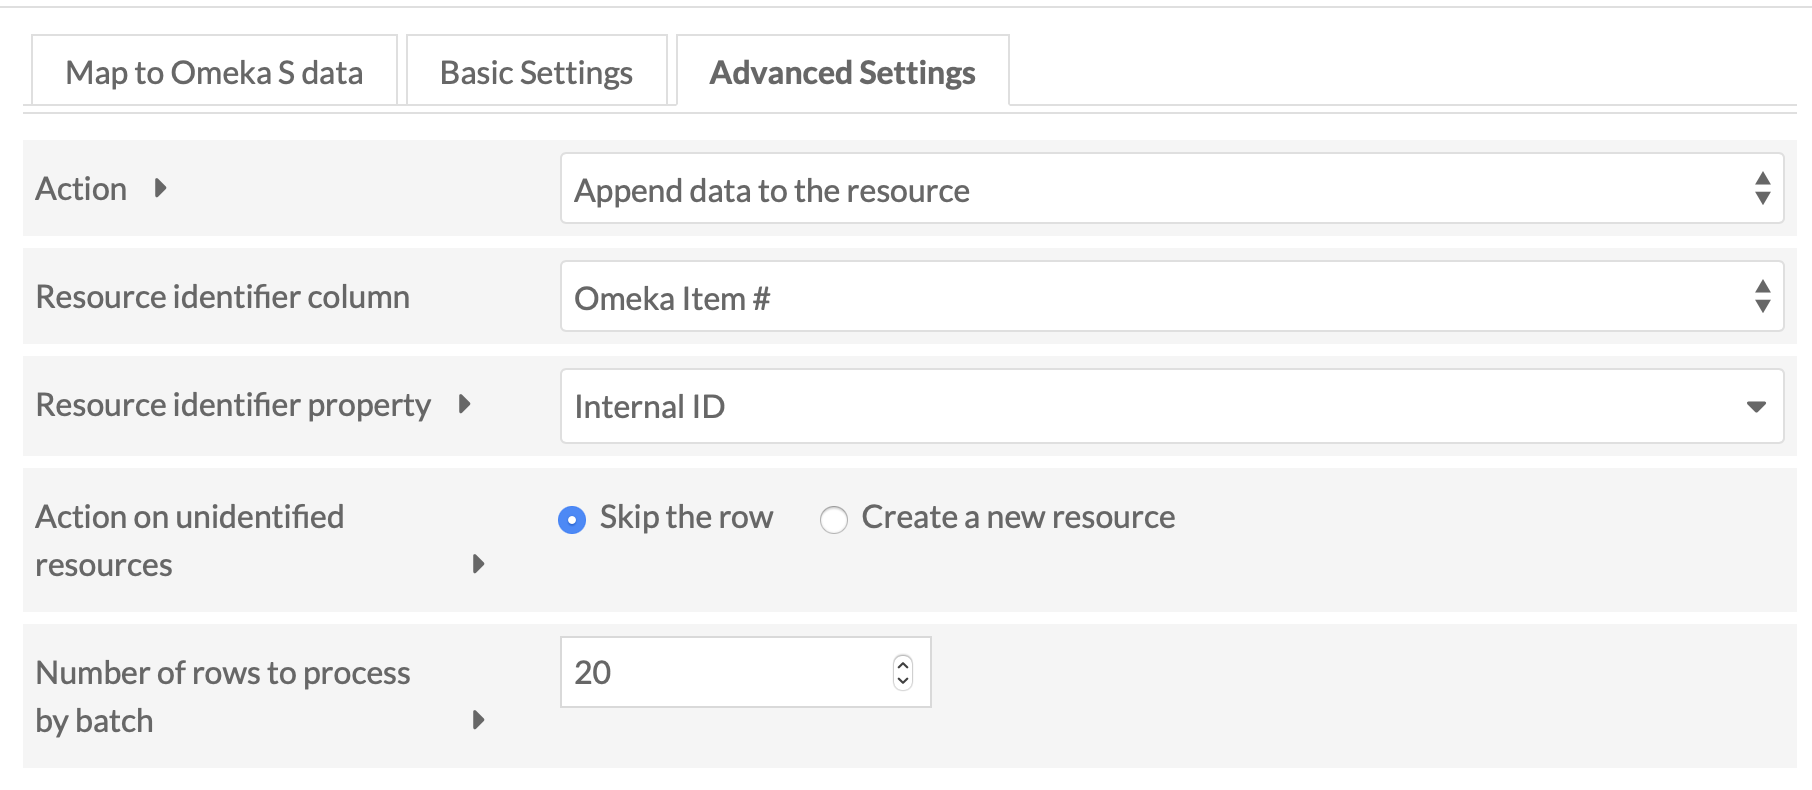 Advanced settings tab with the option to append data selected. The dropdown for identifier is set to Omeka Item # and the property is set to internal ID